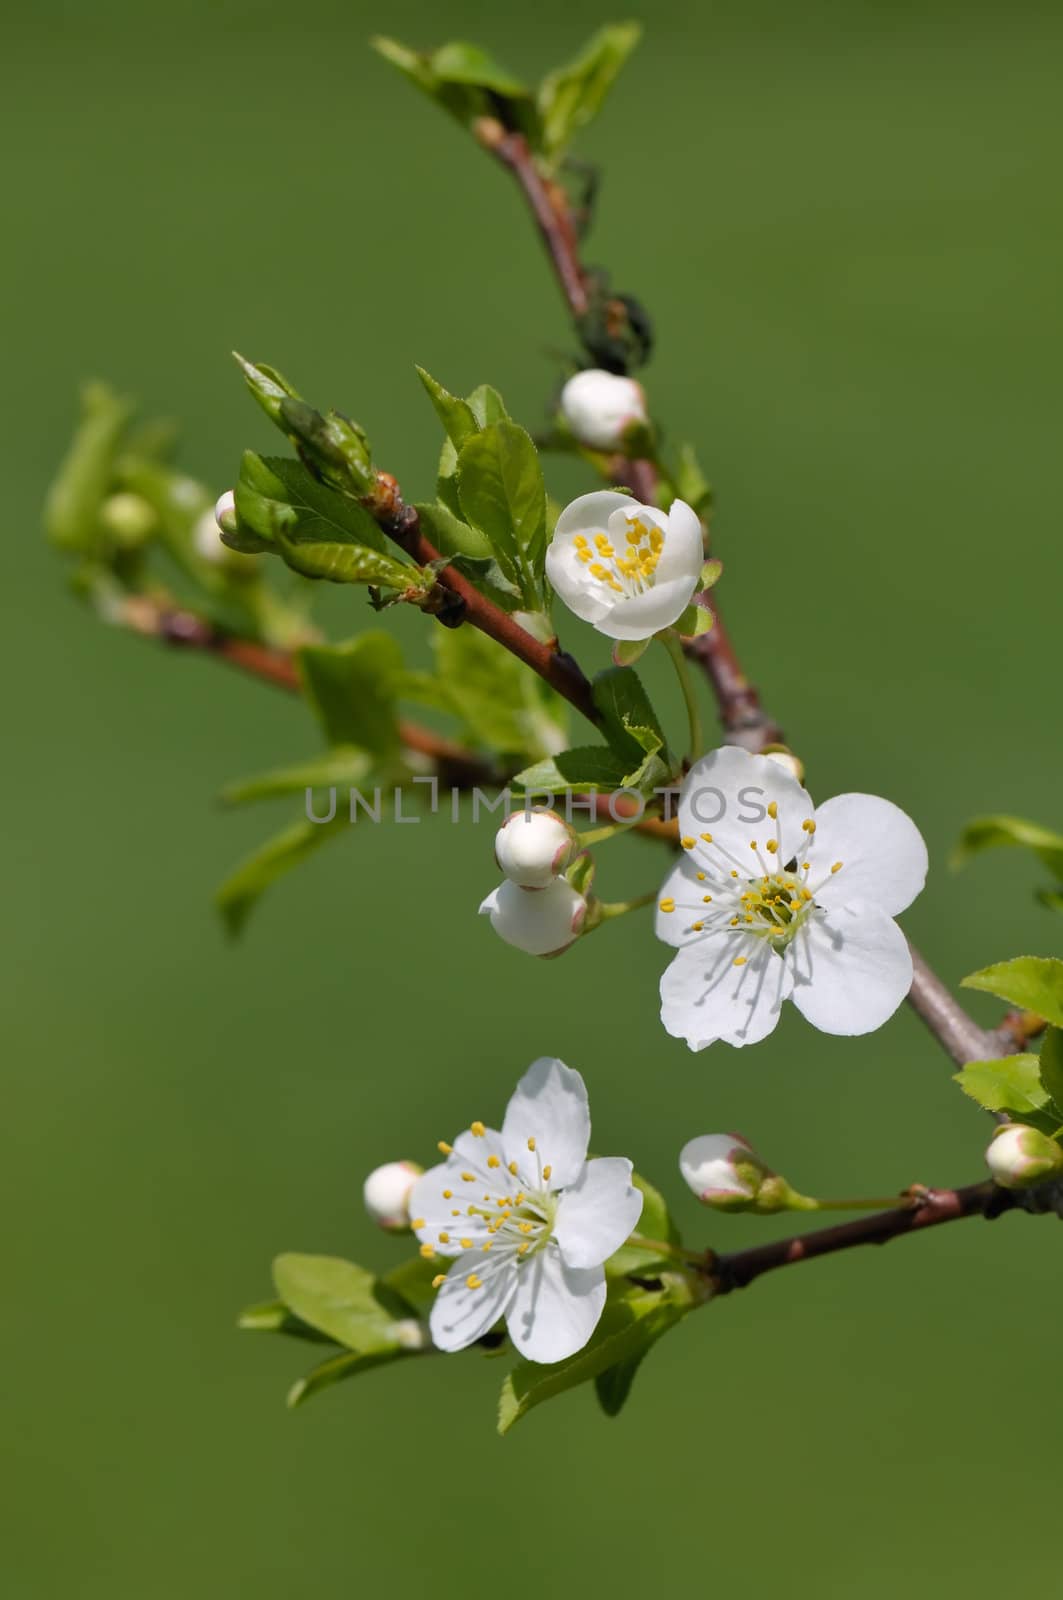 Plum flowers and buds by Hbak